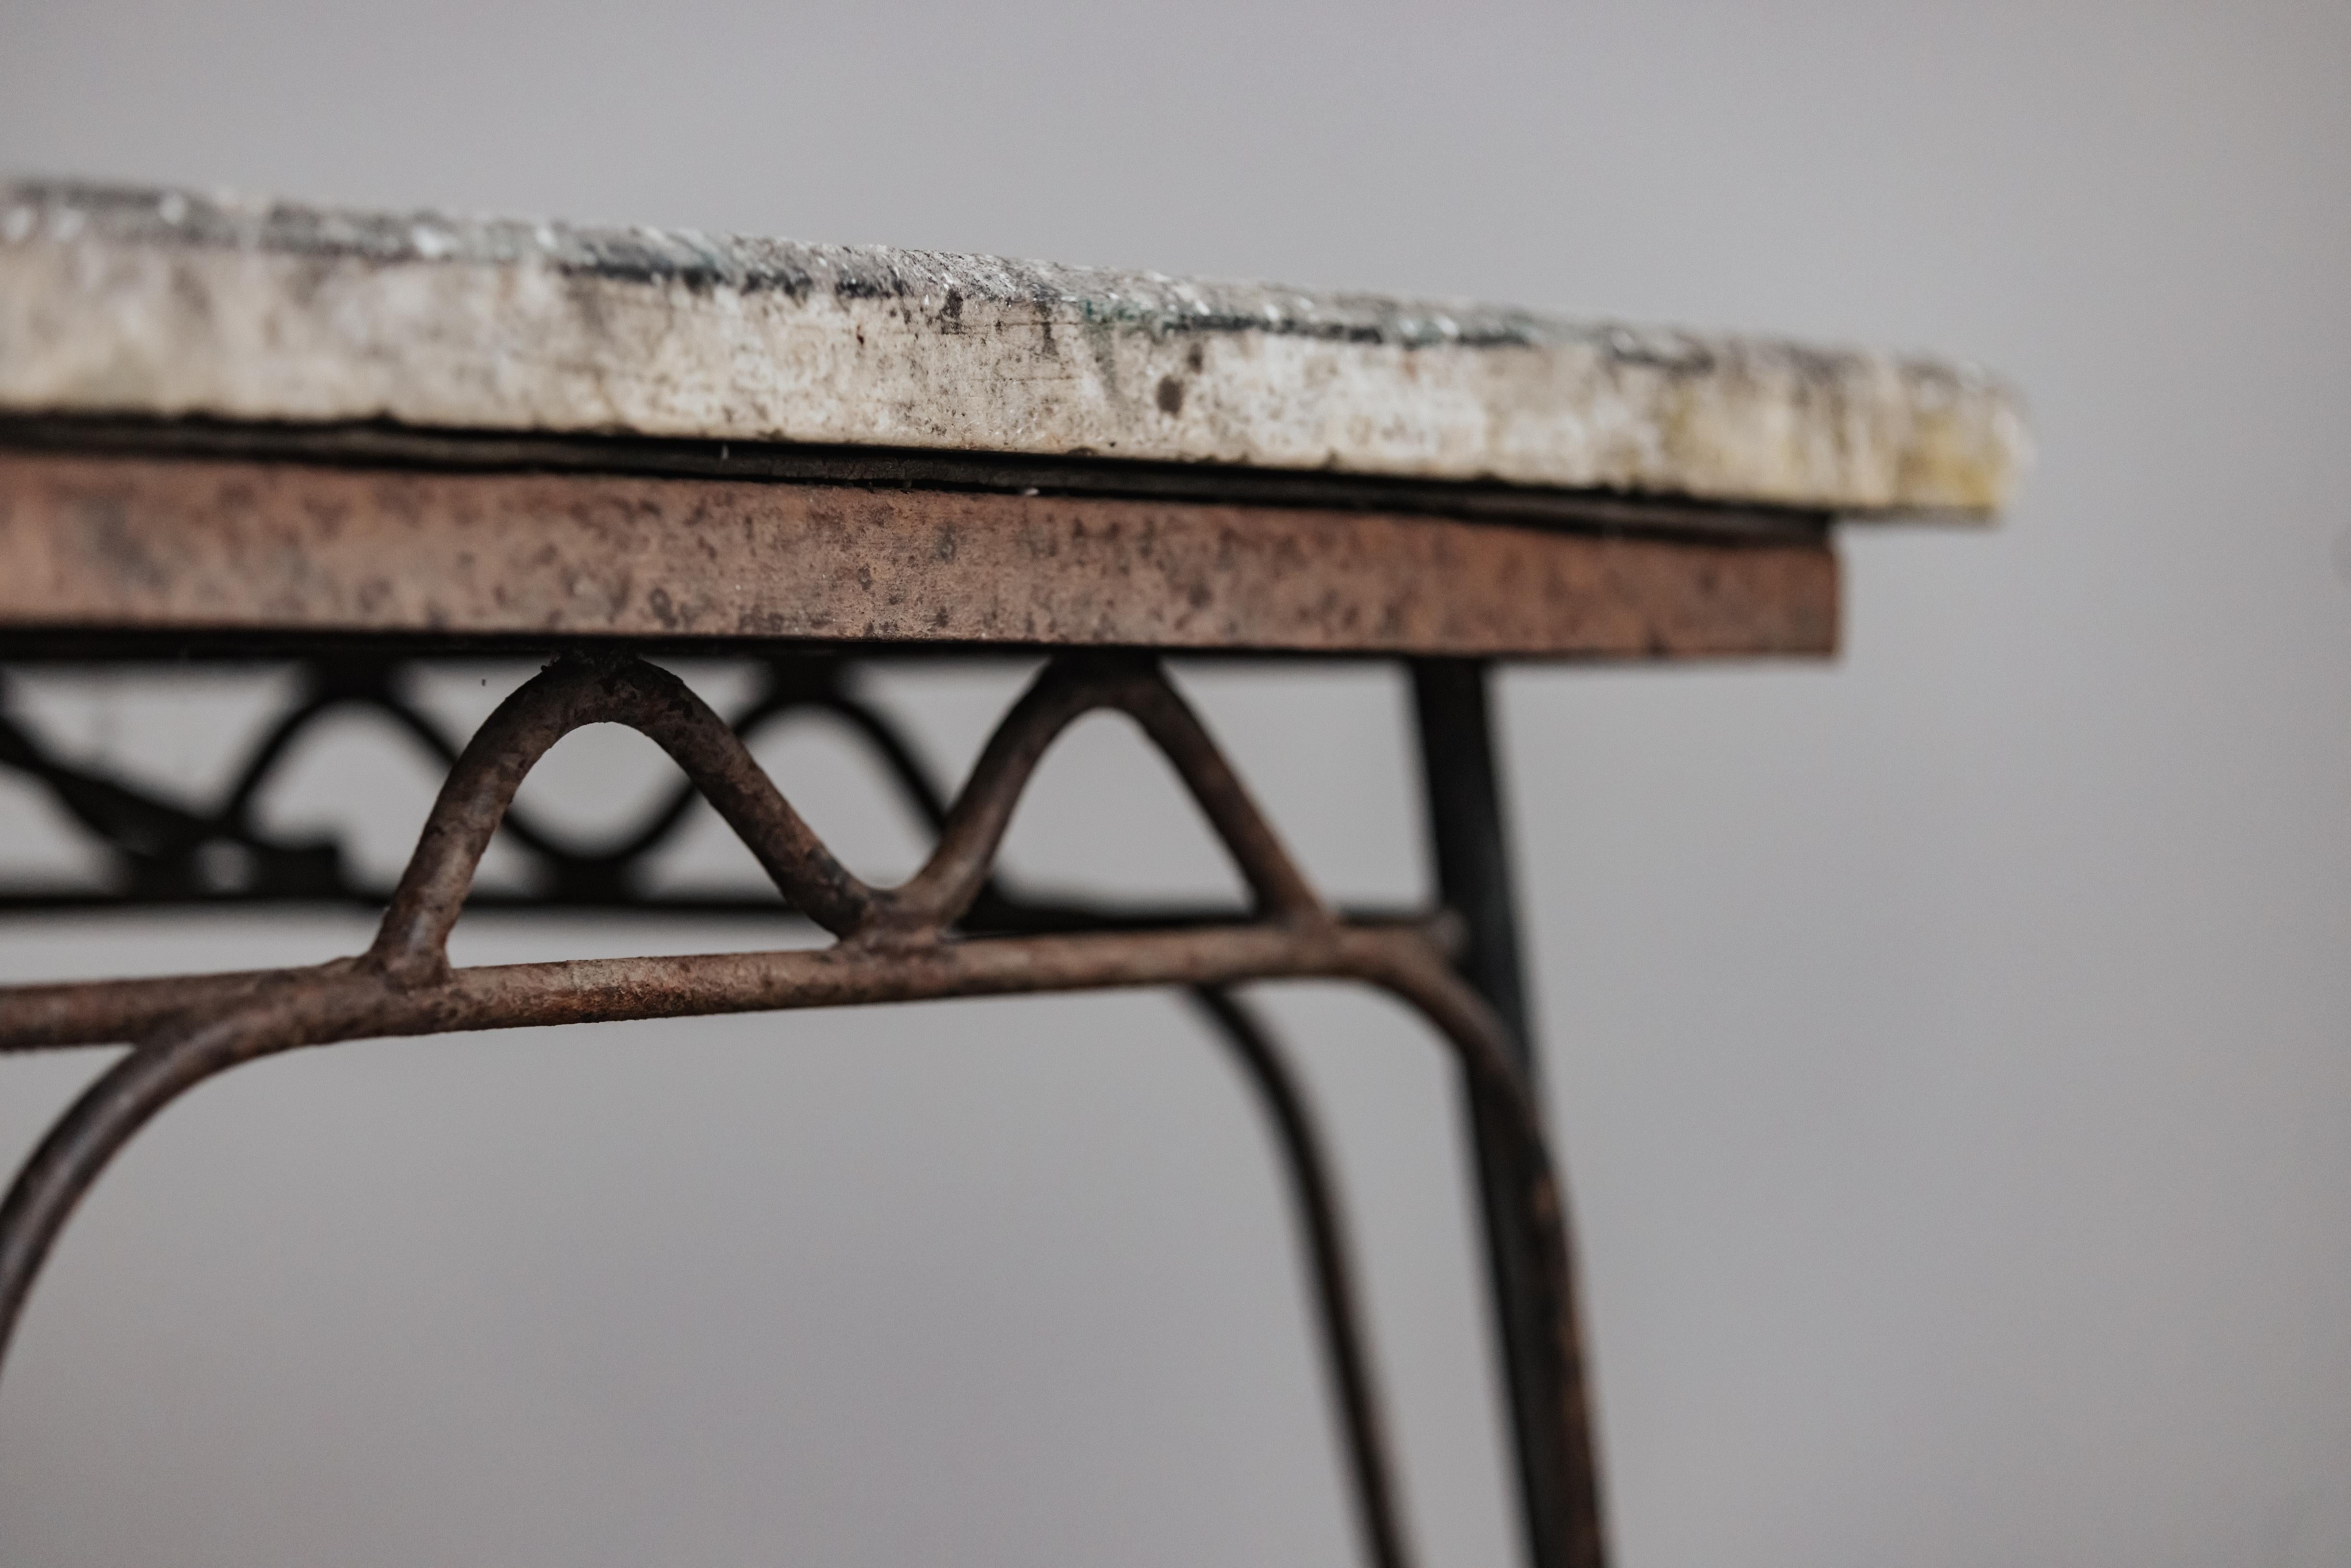 Vintage Concrete Garden Table From France, Circa 1940 For Sale 1